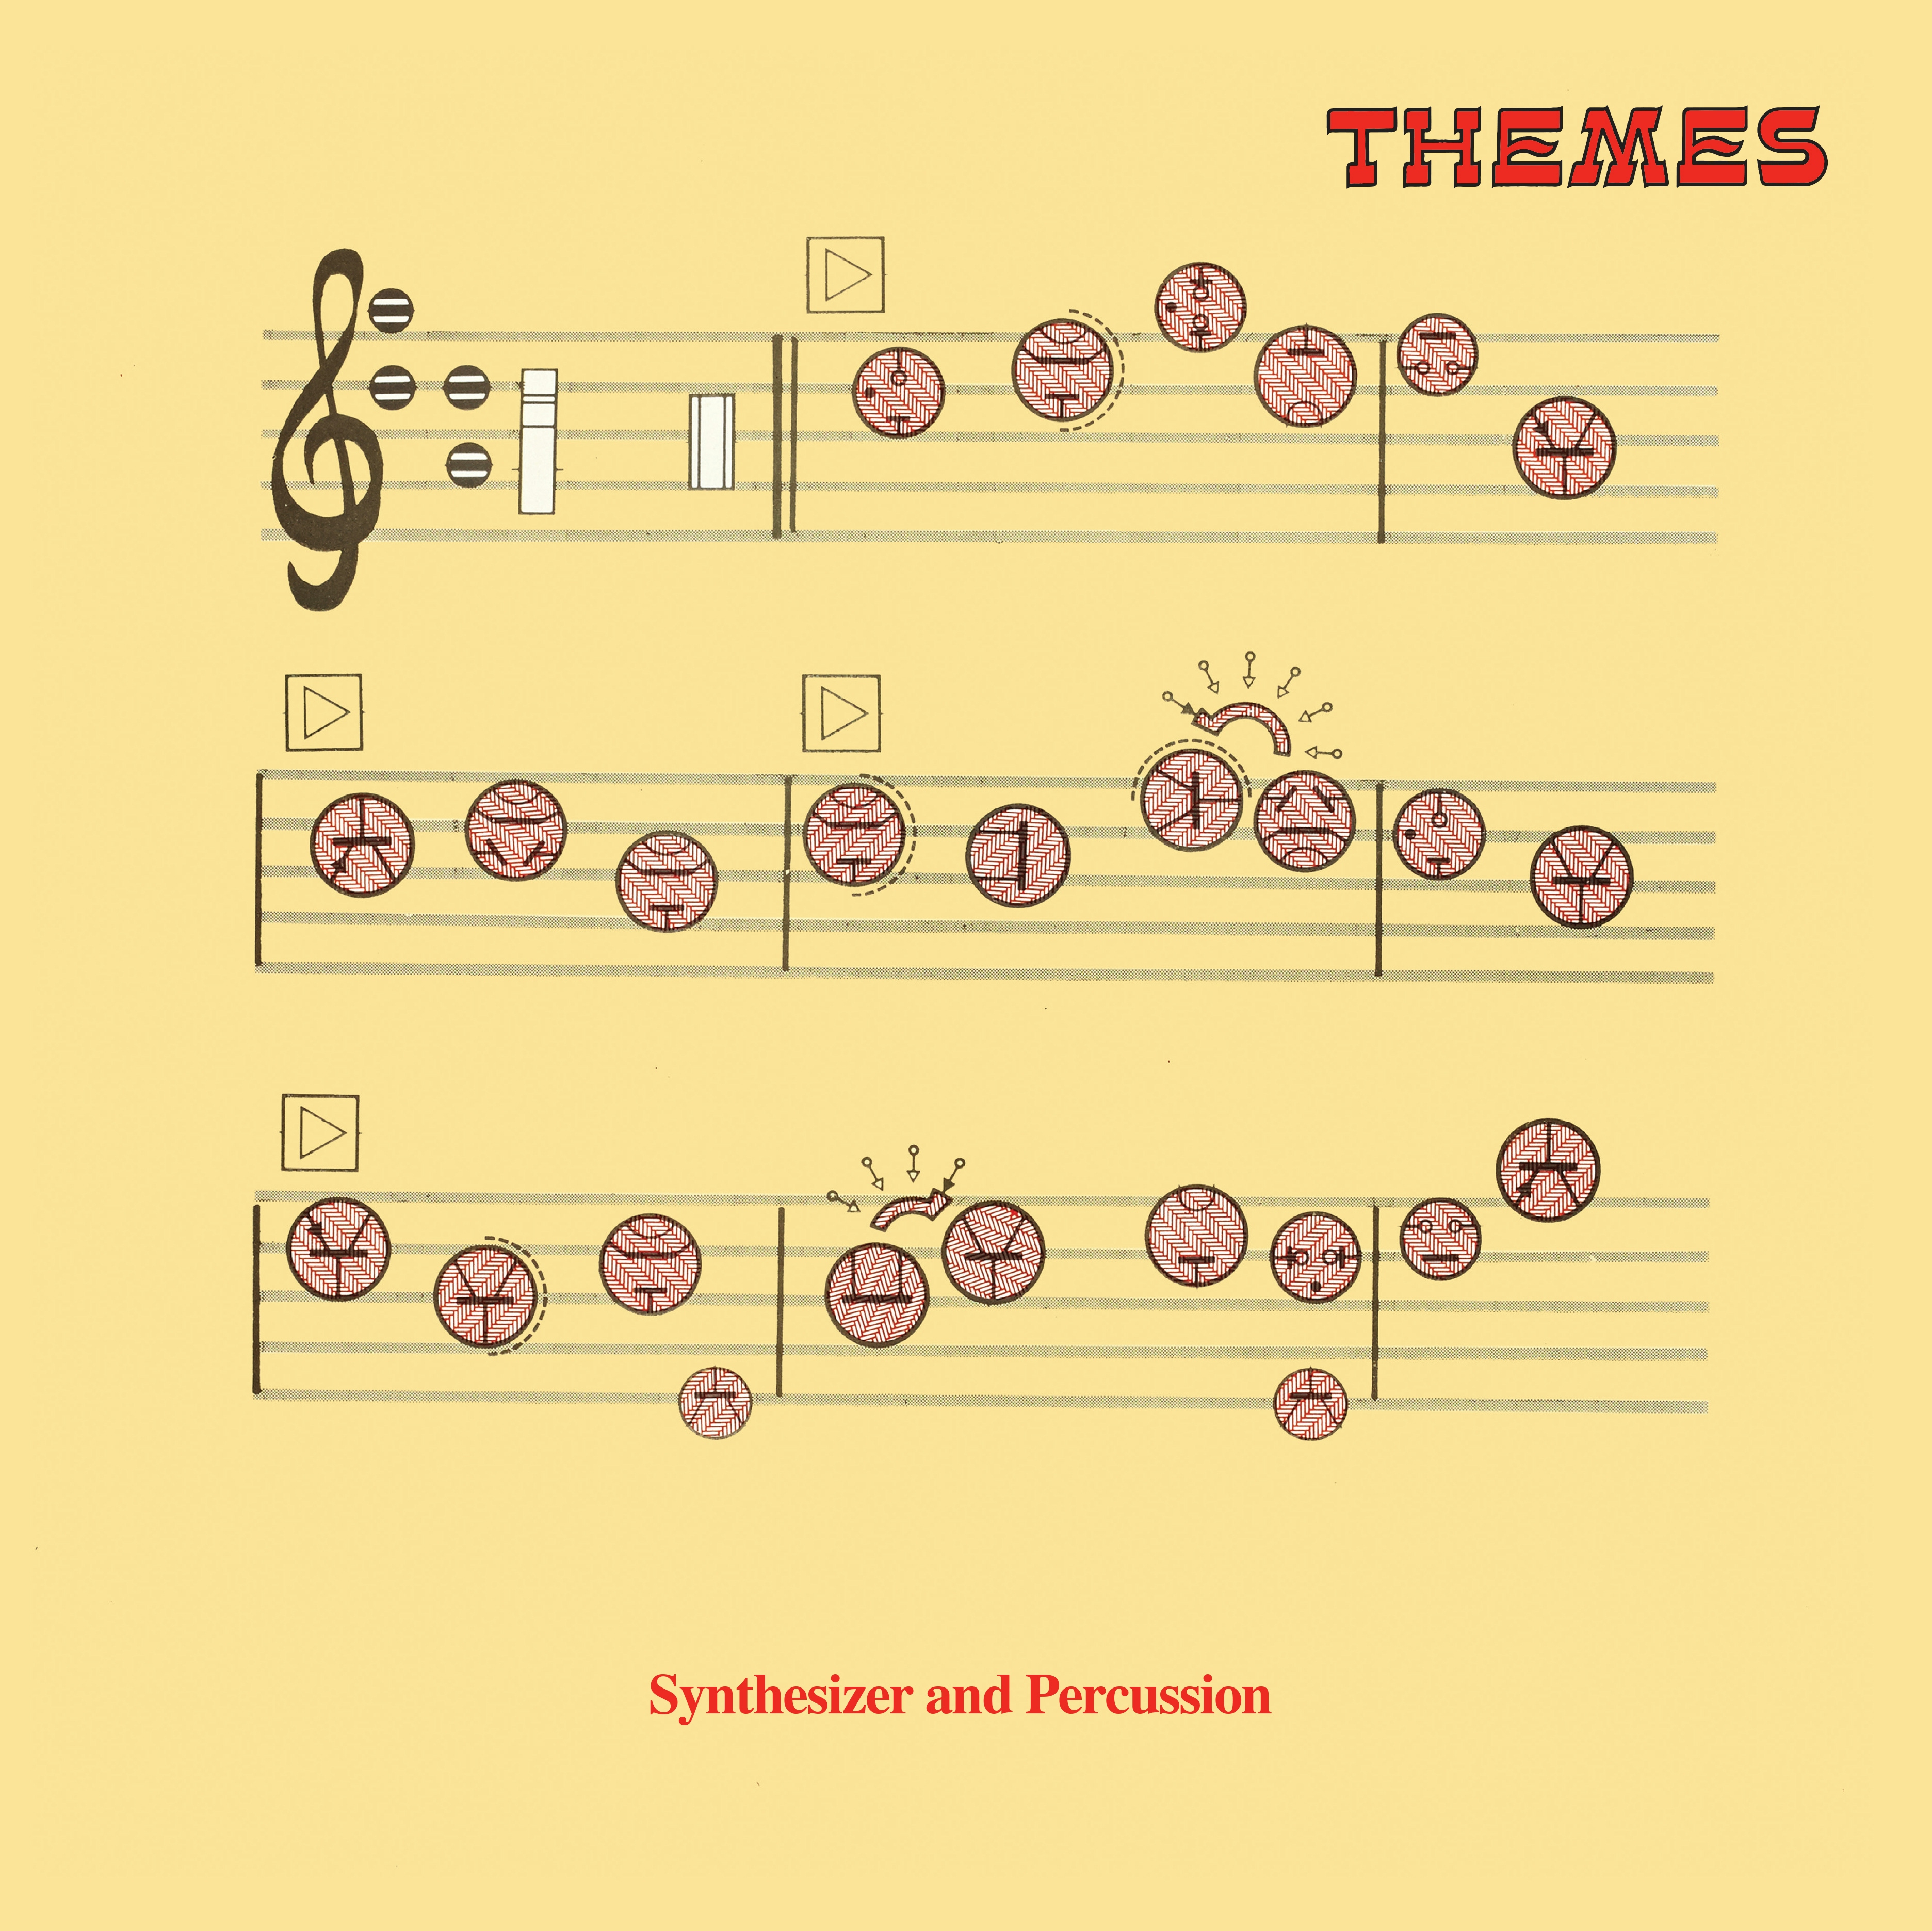 Album artwork for Synthesizer and Percussion (Themes Reissues) by Alan Hawkshaw and Brian Bennett